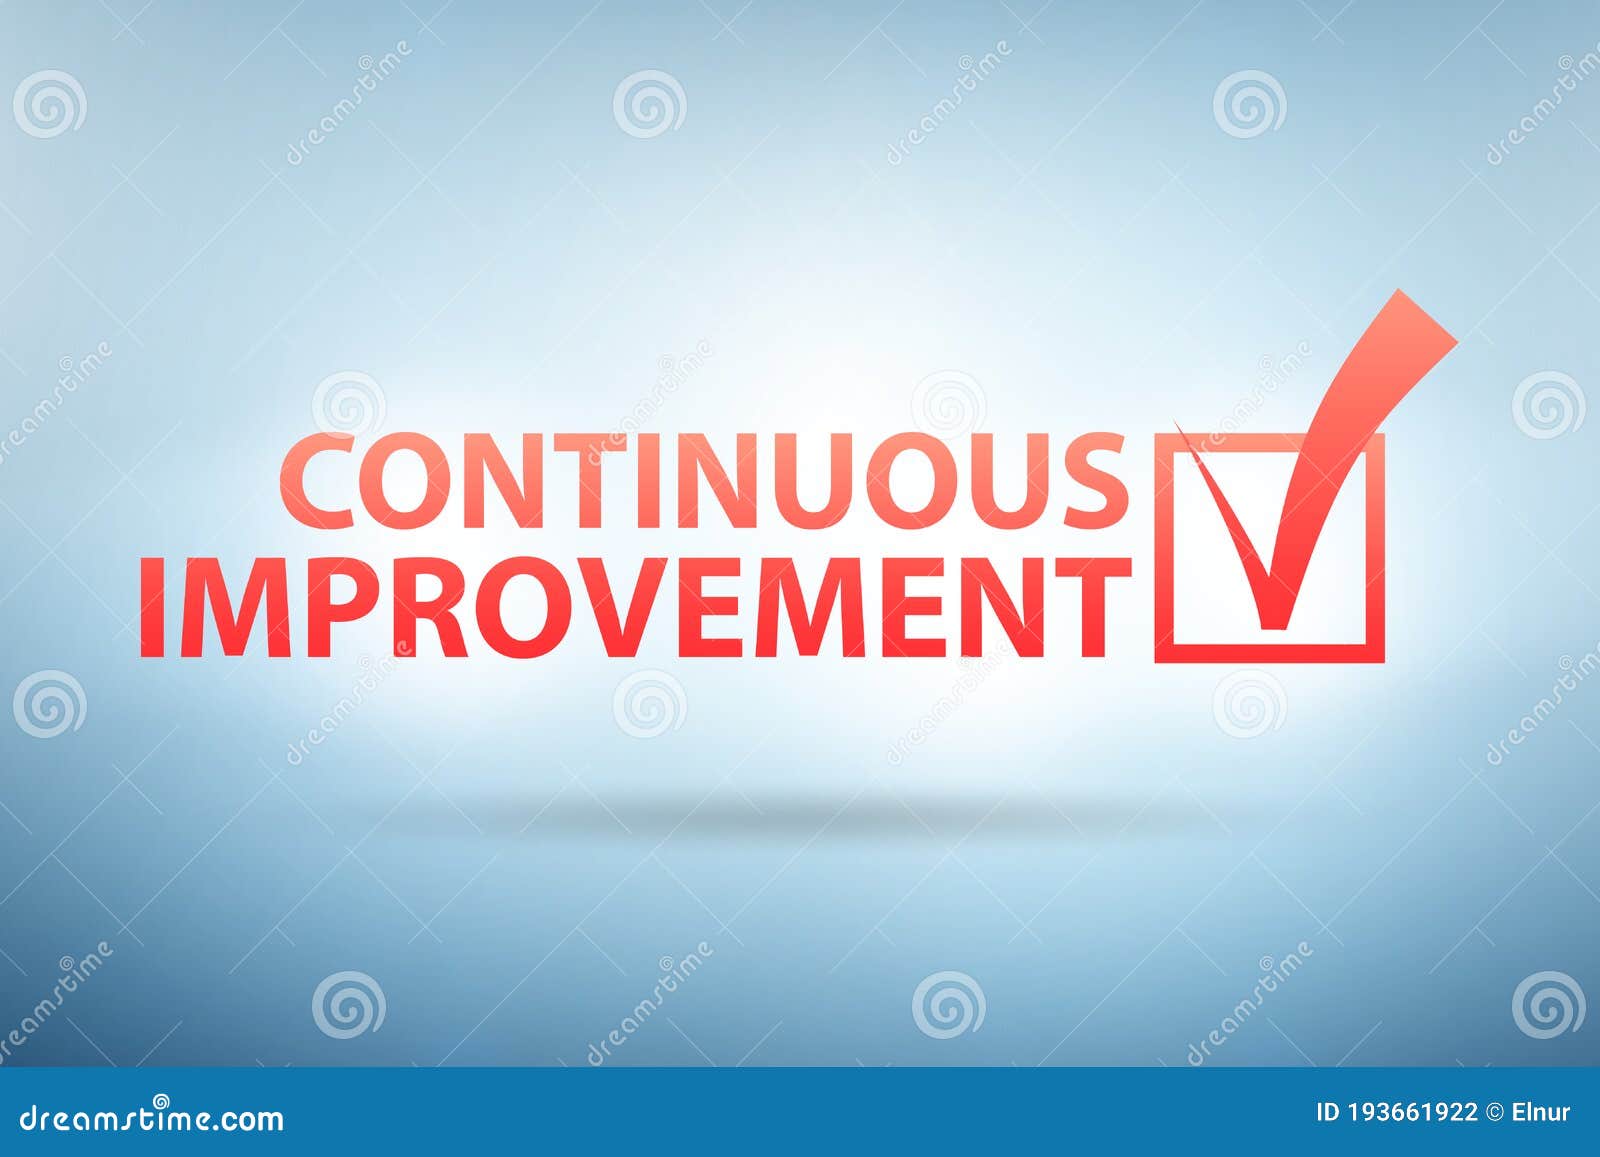 continuous improvement concept in business